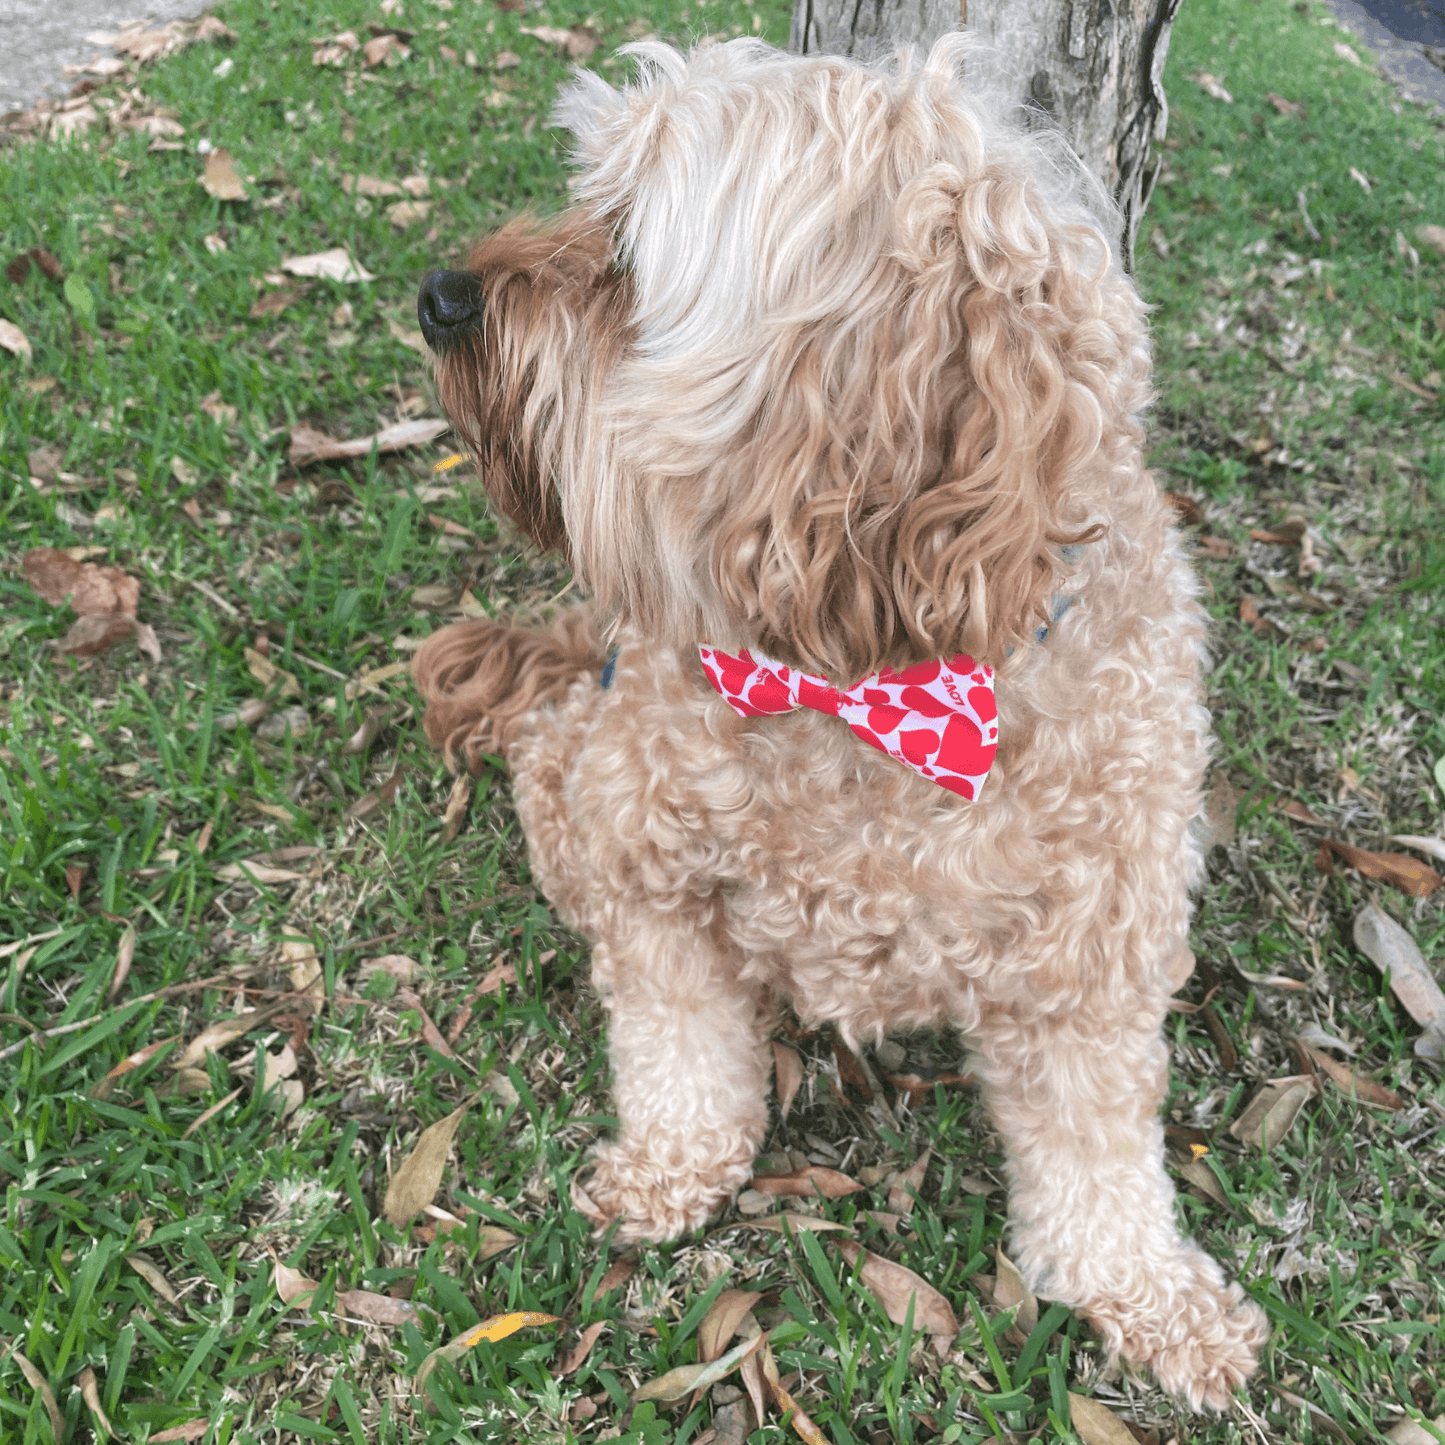 Valentine love dog bow fashion accessory red cream with red hearts, let's pawty